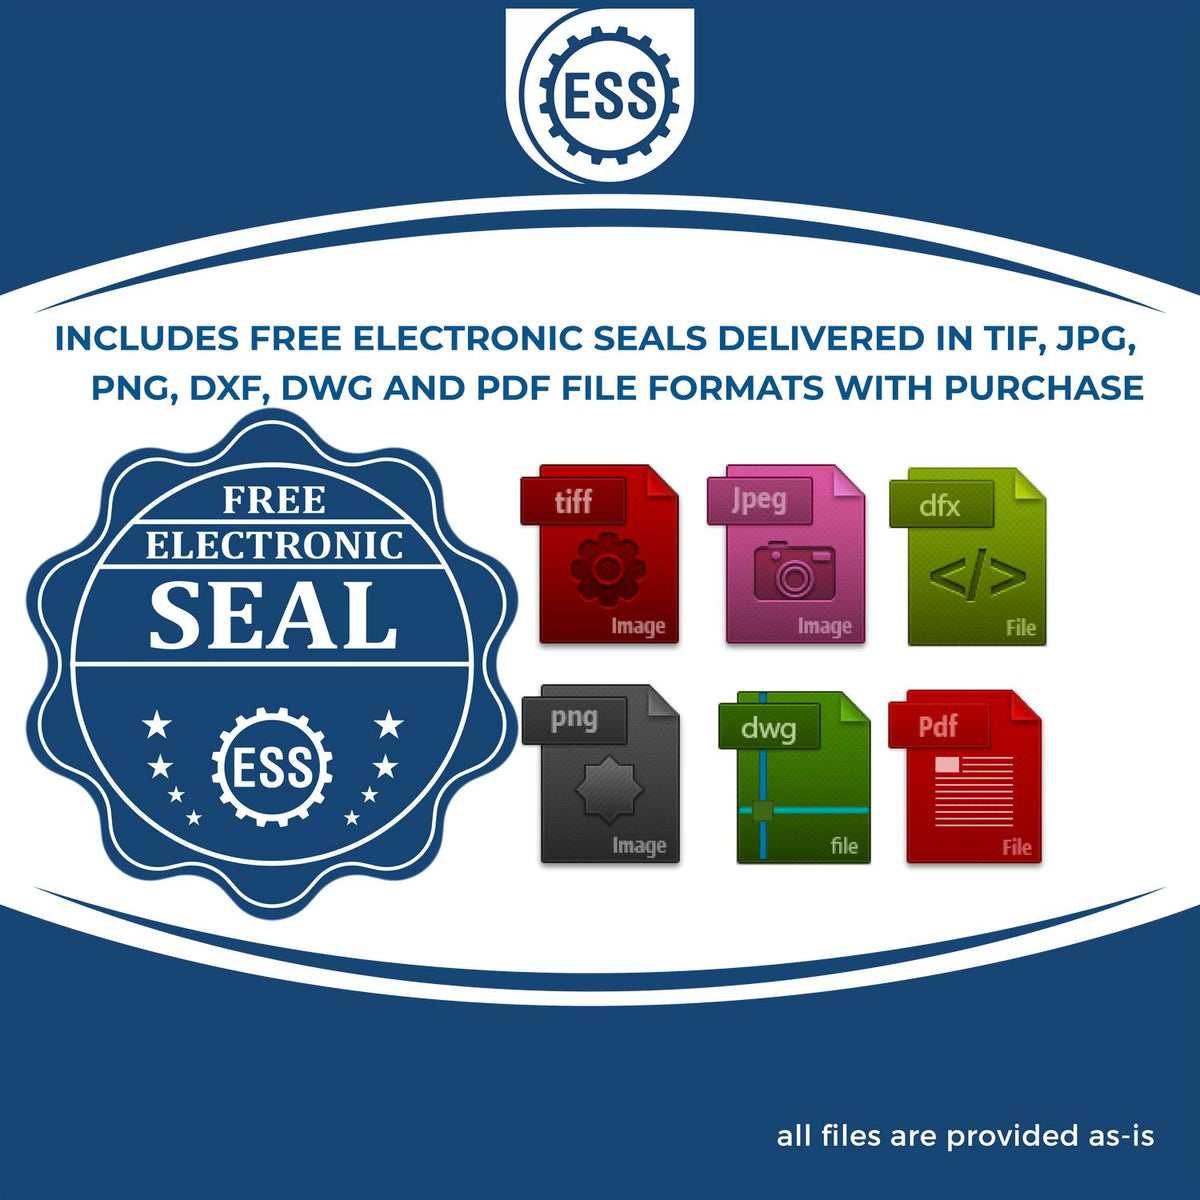 An infographic for the free electronic seal for the State of South Dakota Extended Long Reach Engineer Seal illustrating the different file type icons such as DXF, DWG, TIF, JPG and PNG.